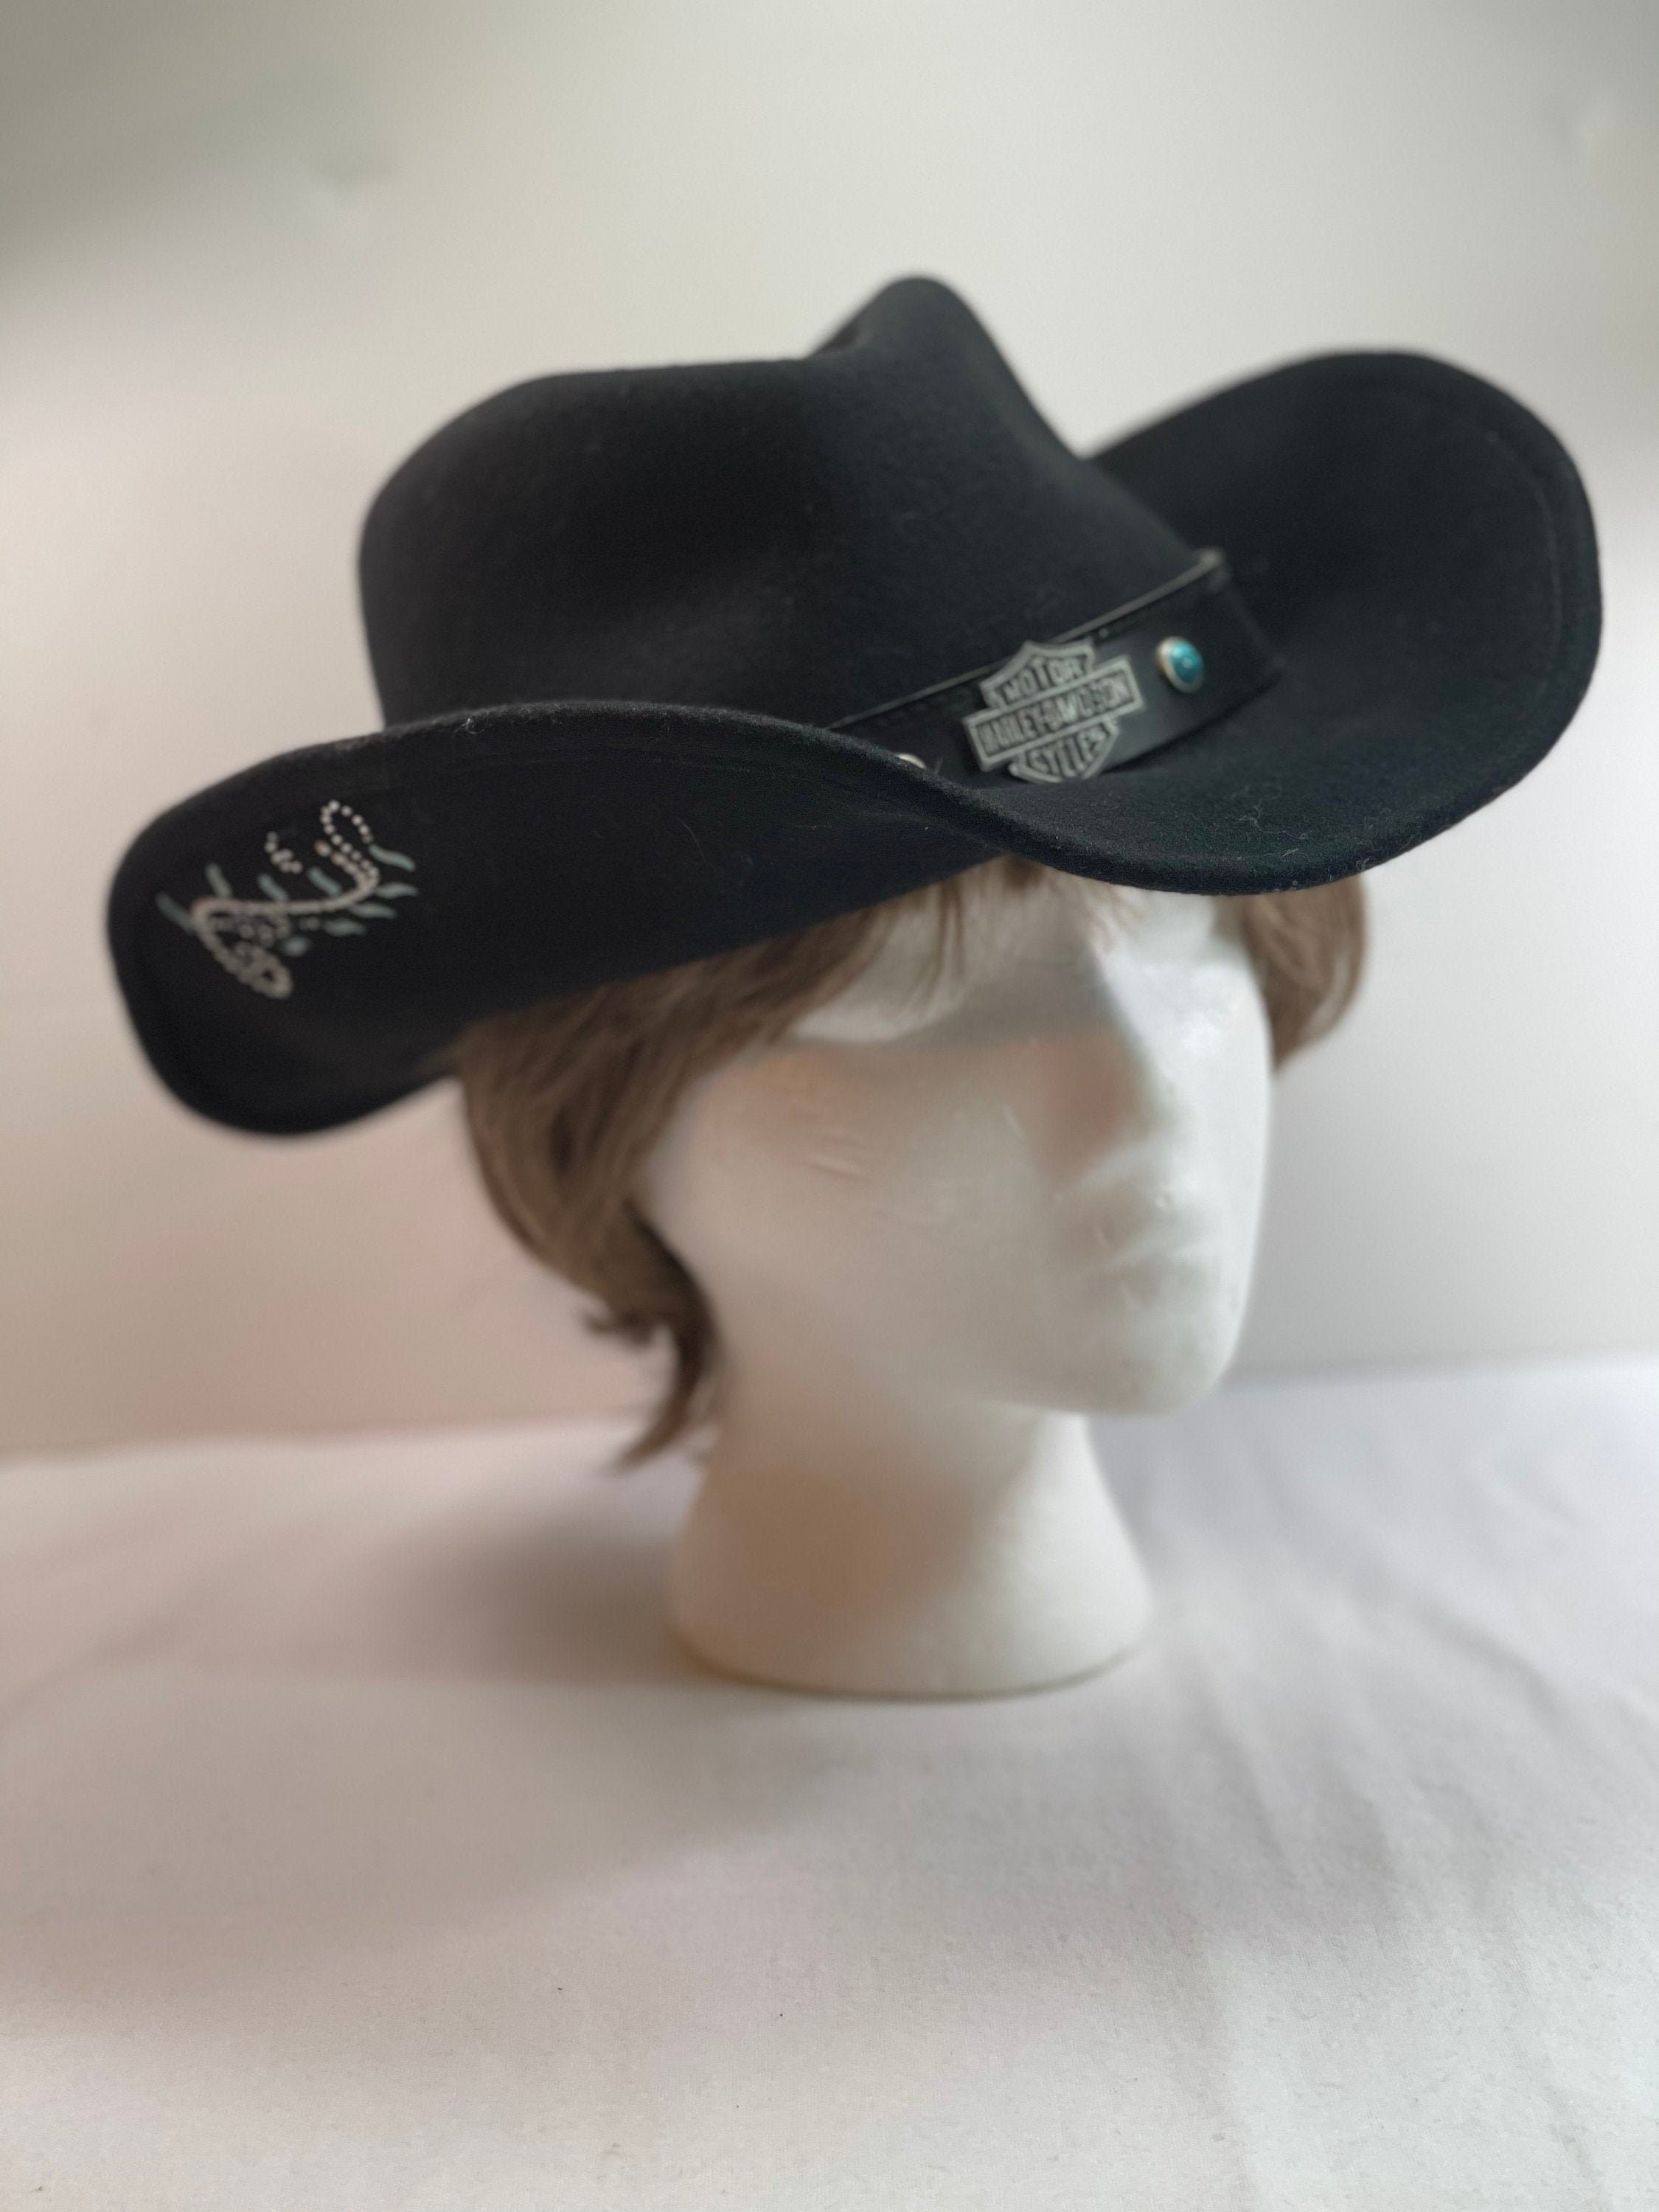 Vintage Black Harley Davidson Cowboy Hat With Turquoise and White